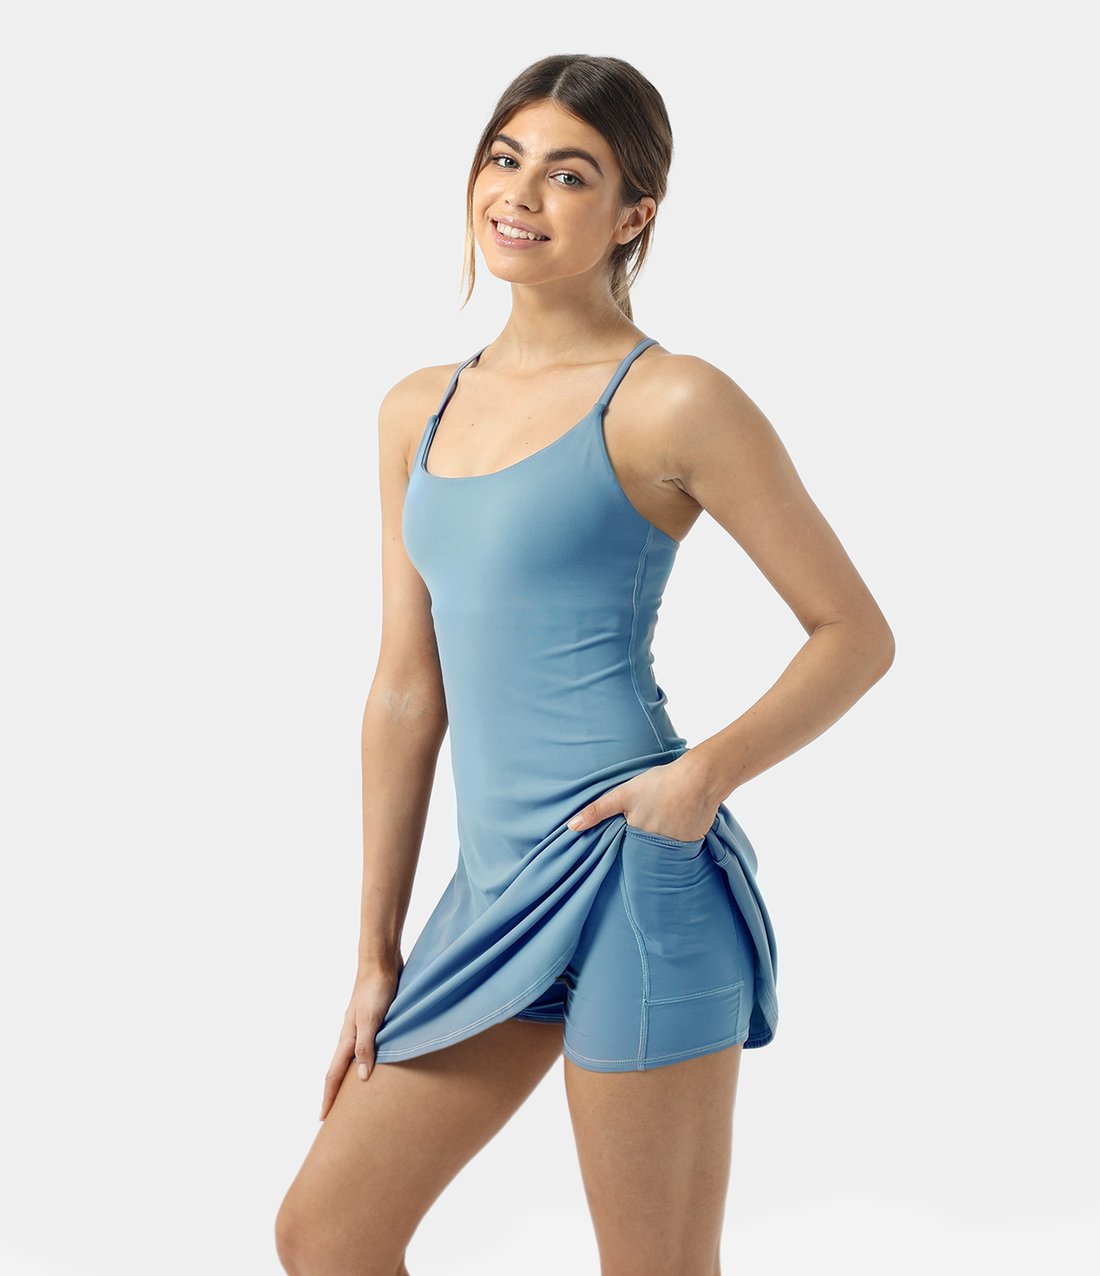 Women's Workout Sleeveless Dress with Built-in India